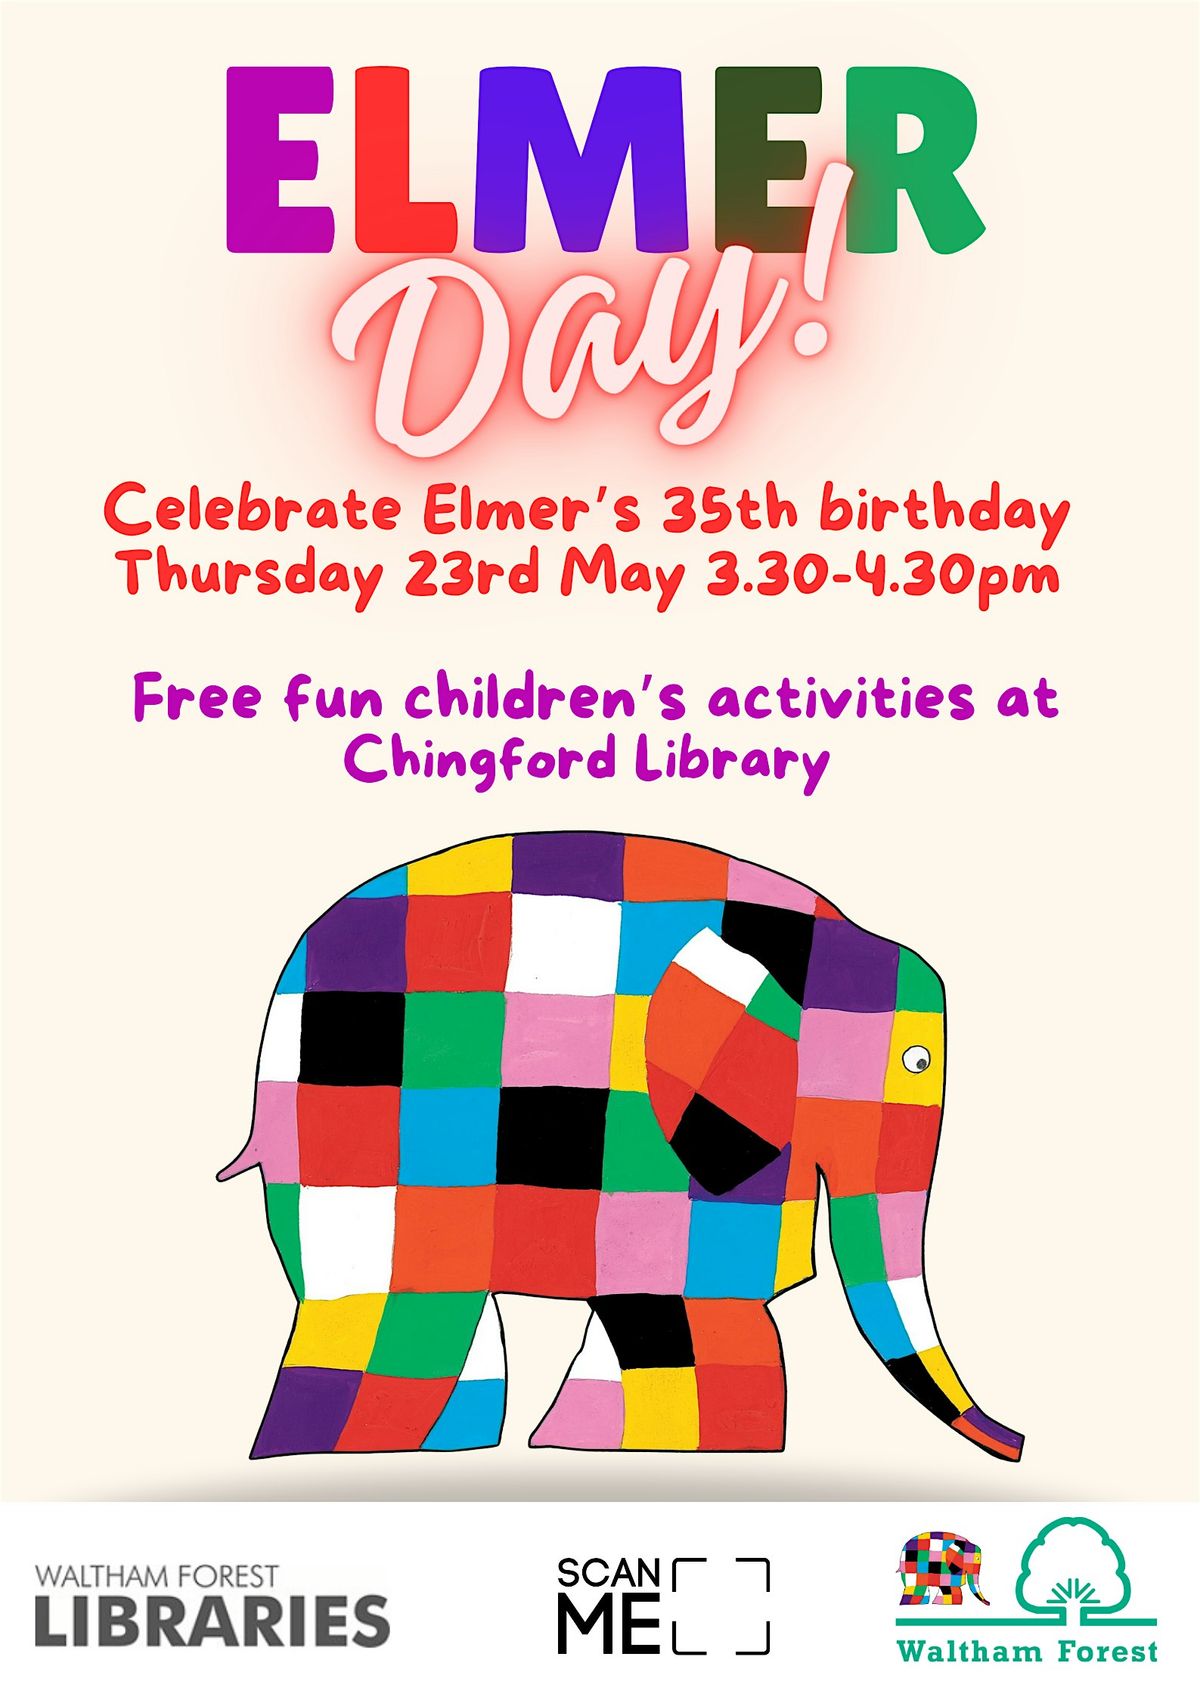 Elmer Day @ Chingford Library